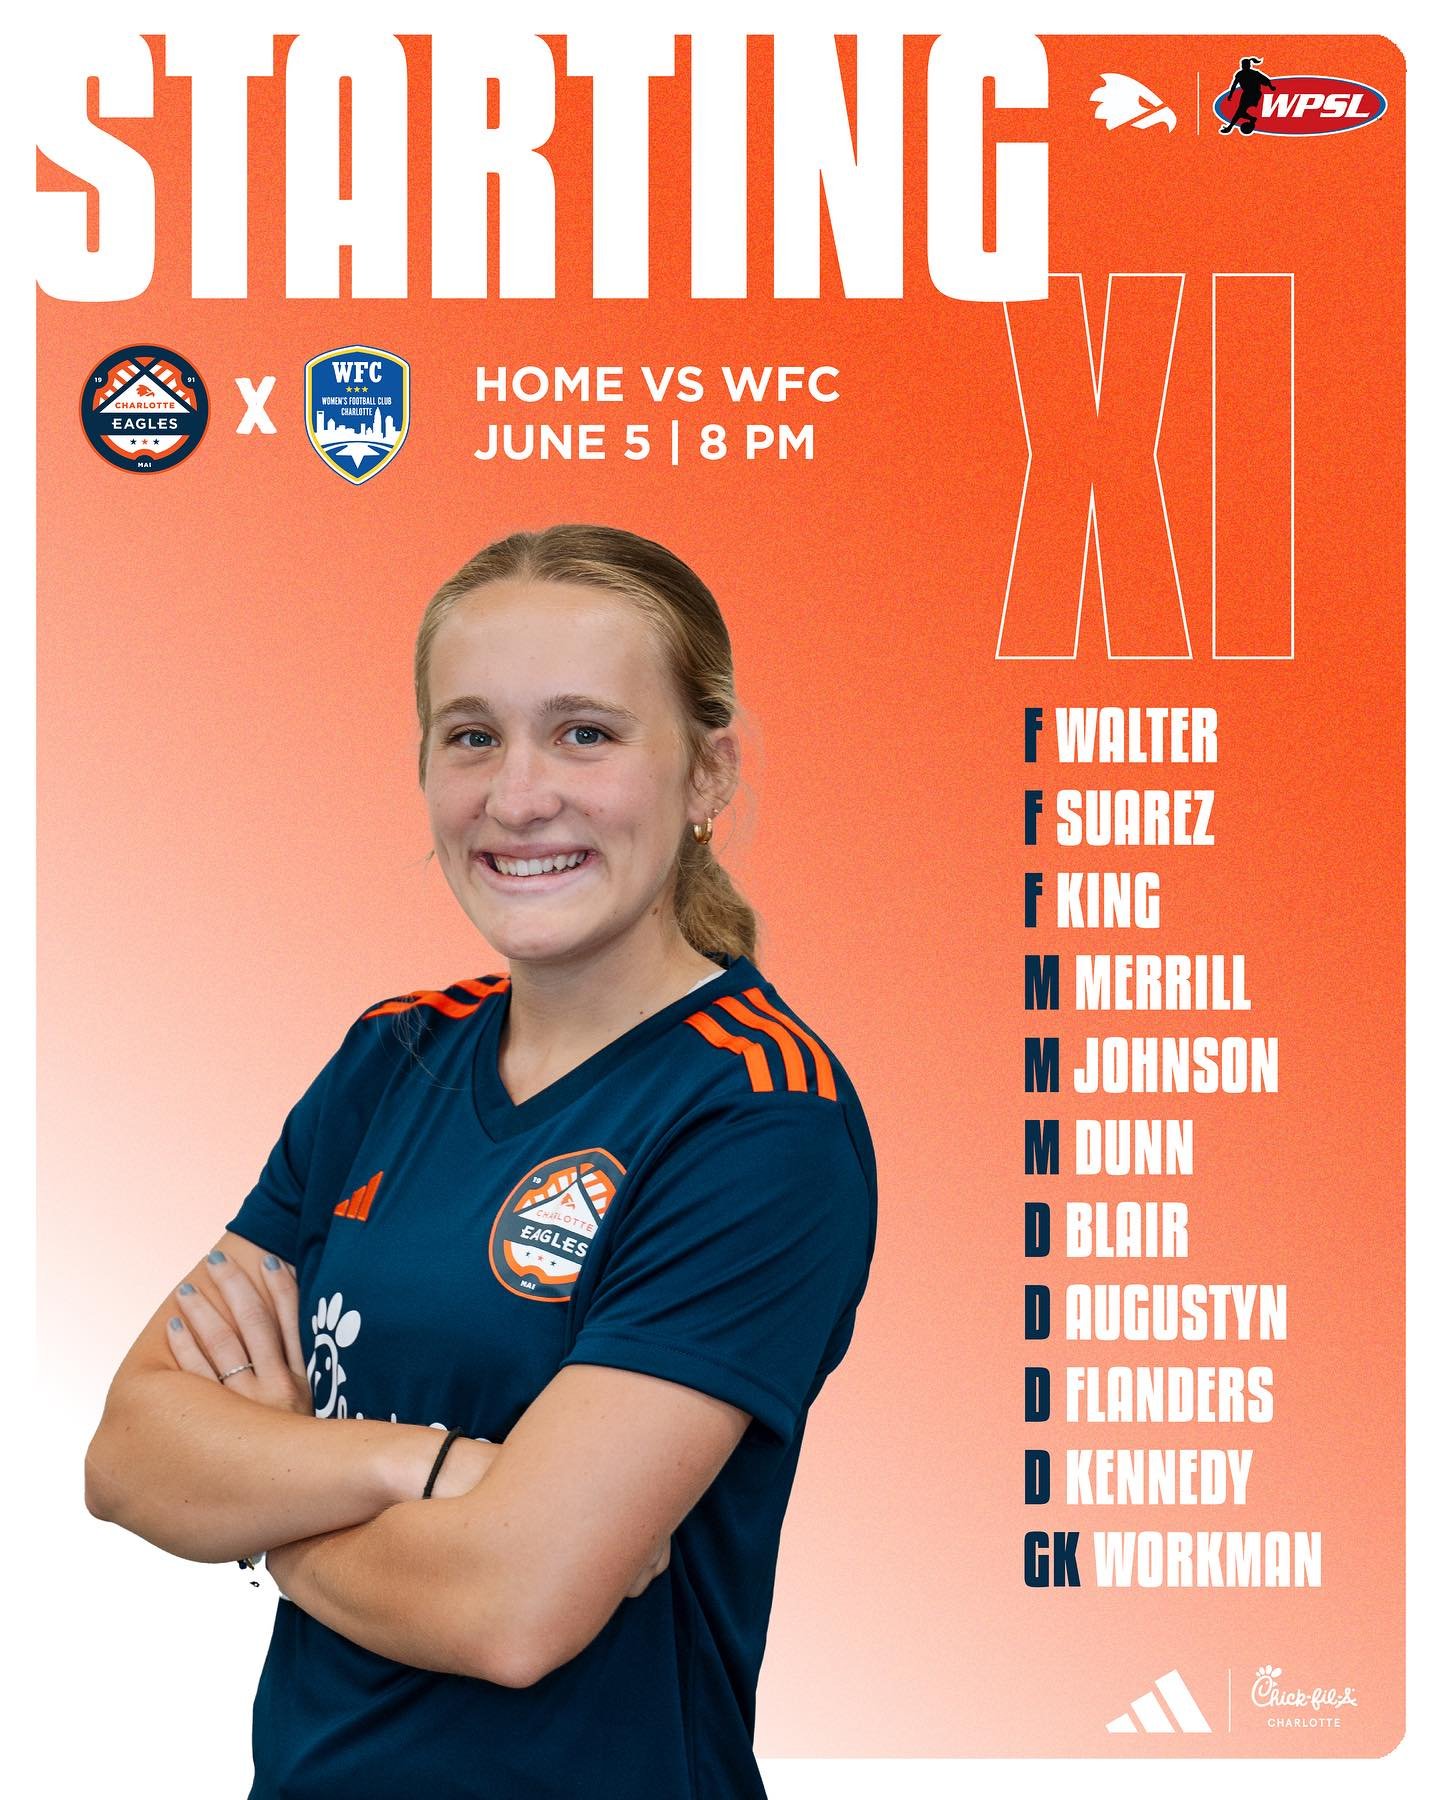 🦅 STARTING XI 🦅

Your staring lineup for the WPSL Home Game tonight @ 8 PM!

Come out and support at Charlotte Christian Guy Field or watch tonight&rsquo;s match live on the link in our profile 🔗 

#SoliDeoGloria